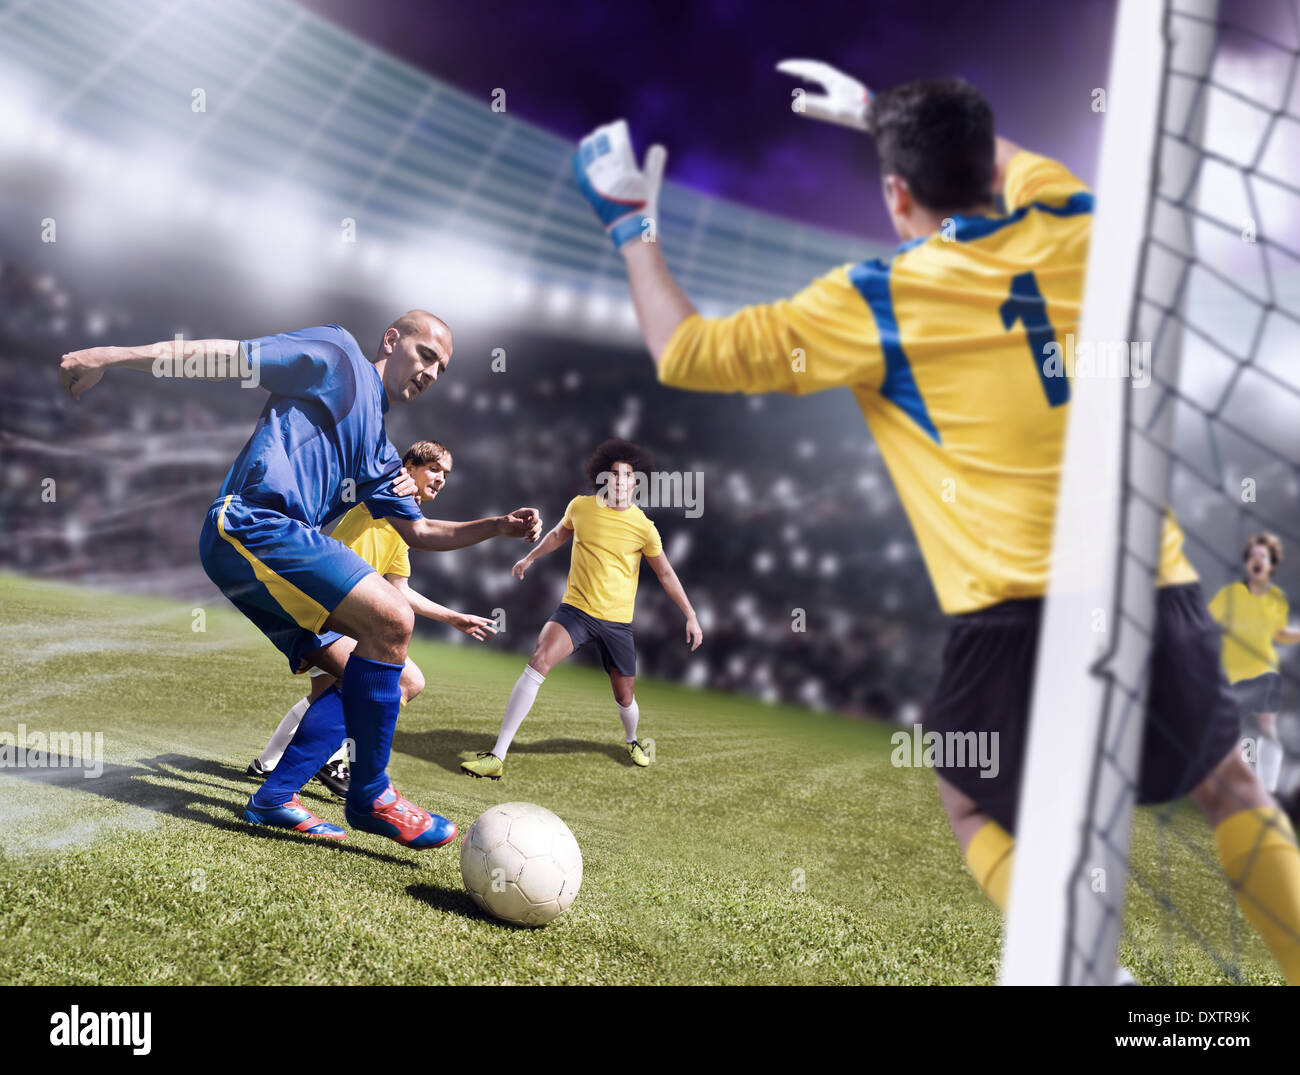 soccer or football players from opposing team on the field Stock Photo